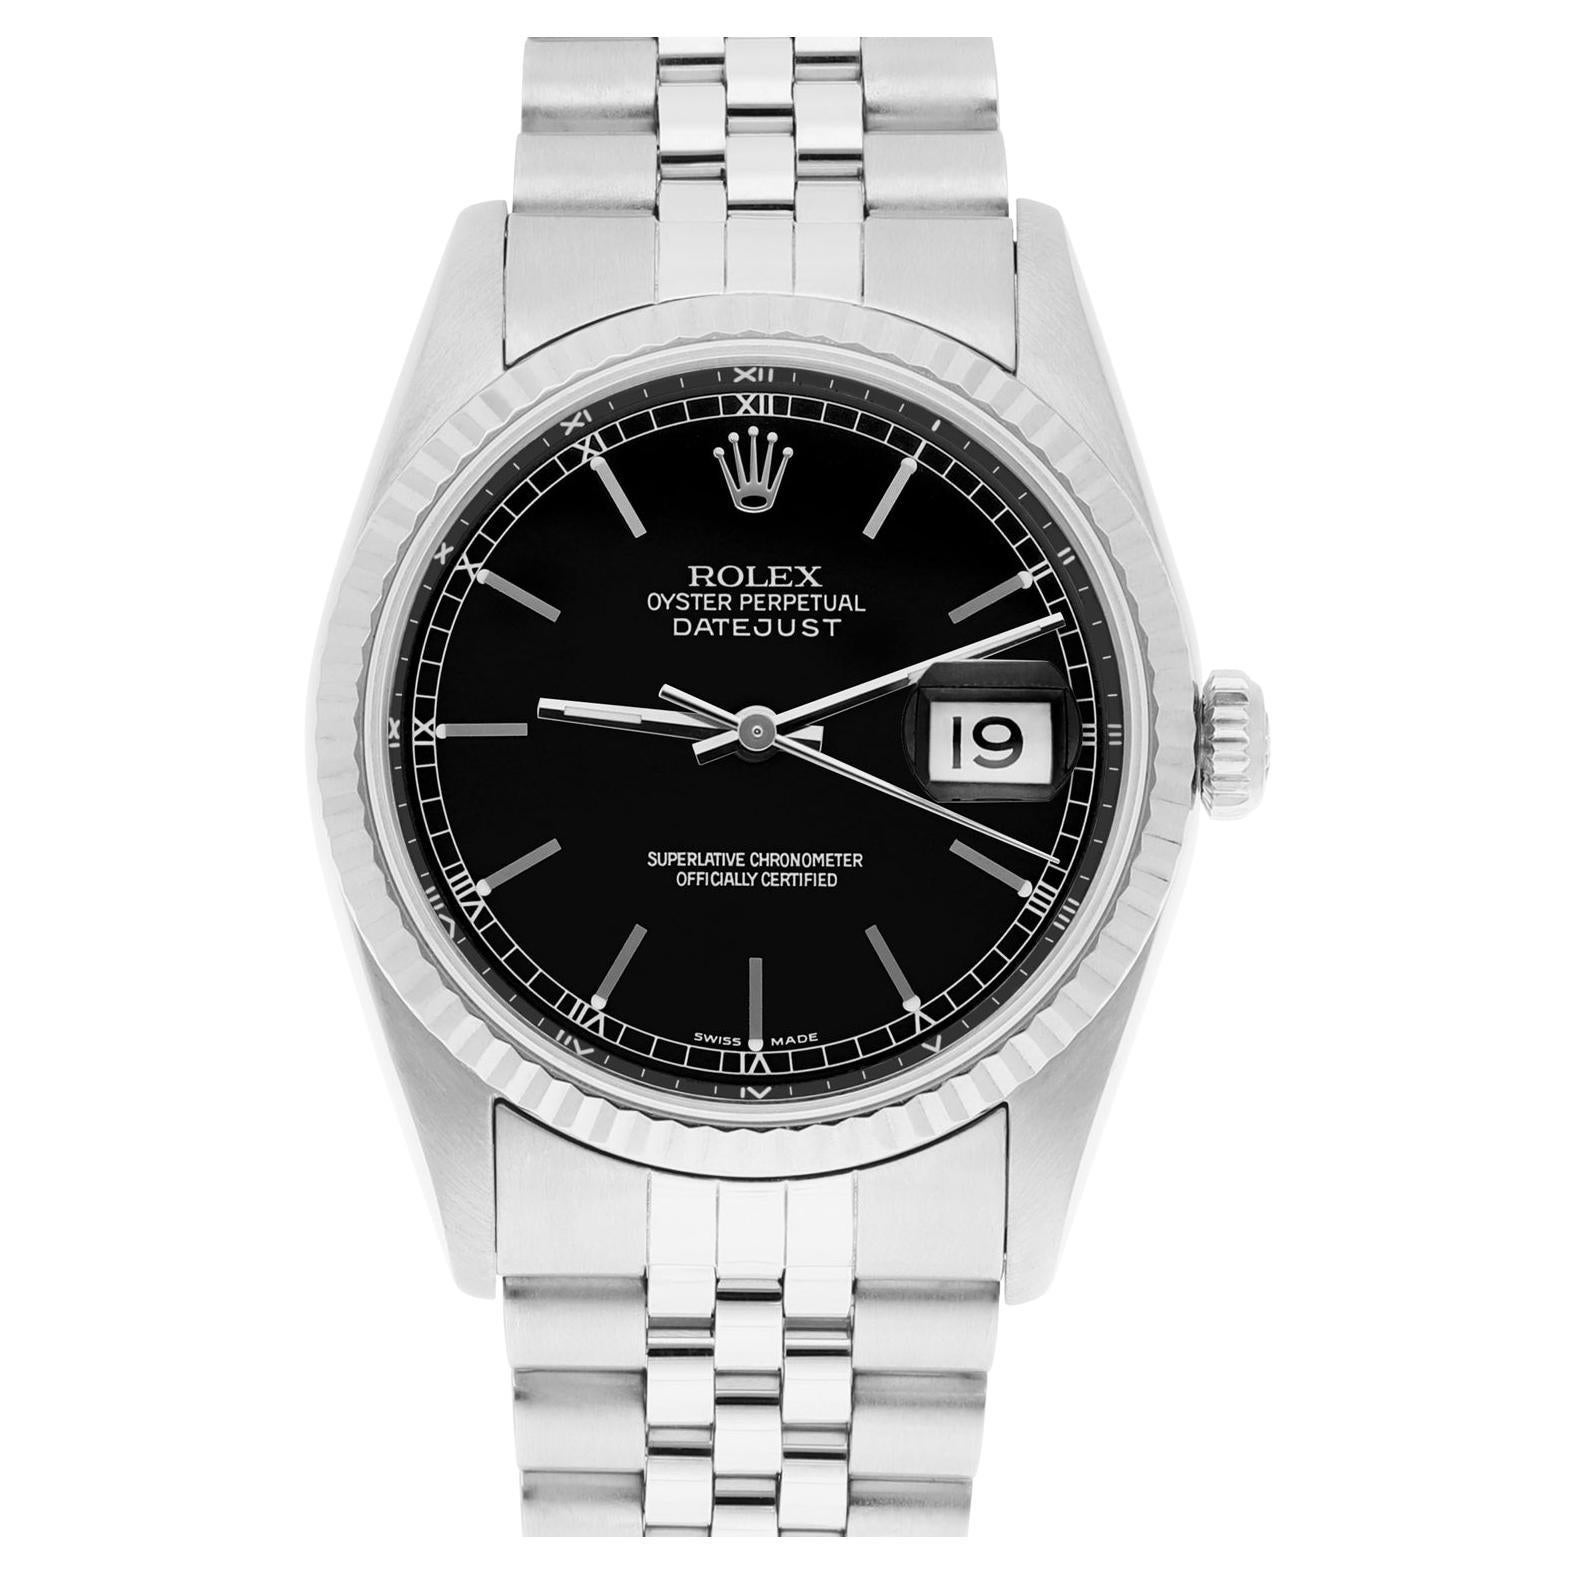 Rolex Datejust 36mm Stainless Steel 16234 Black Index Dial, Jubilee Circa 2000 For Sale